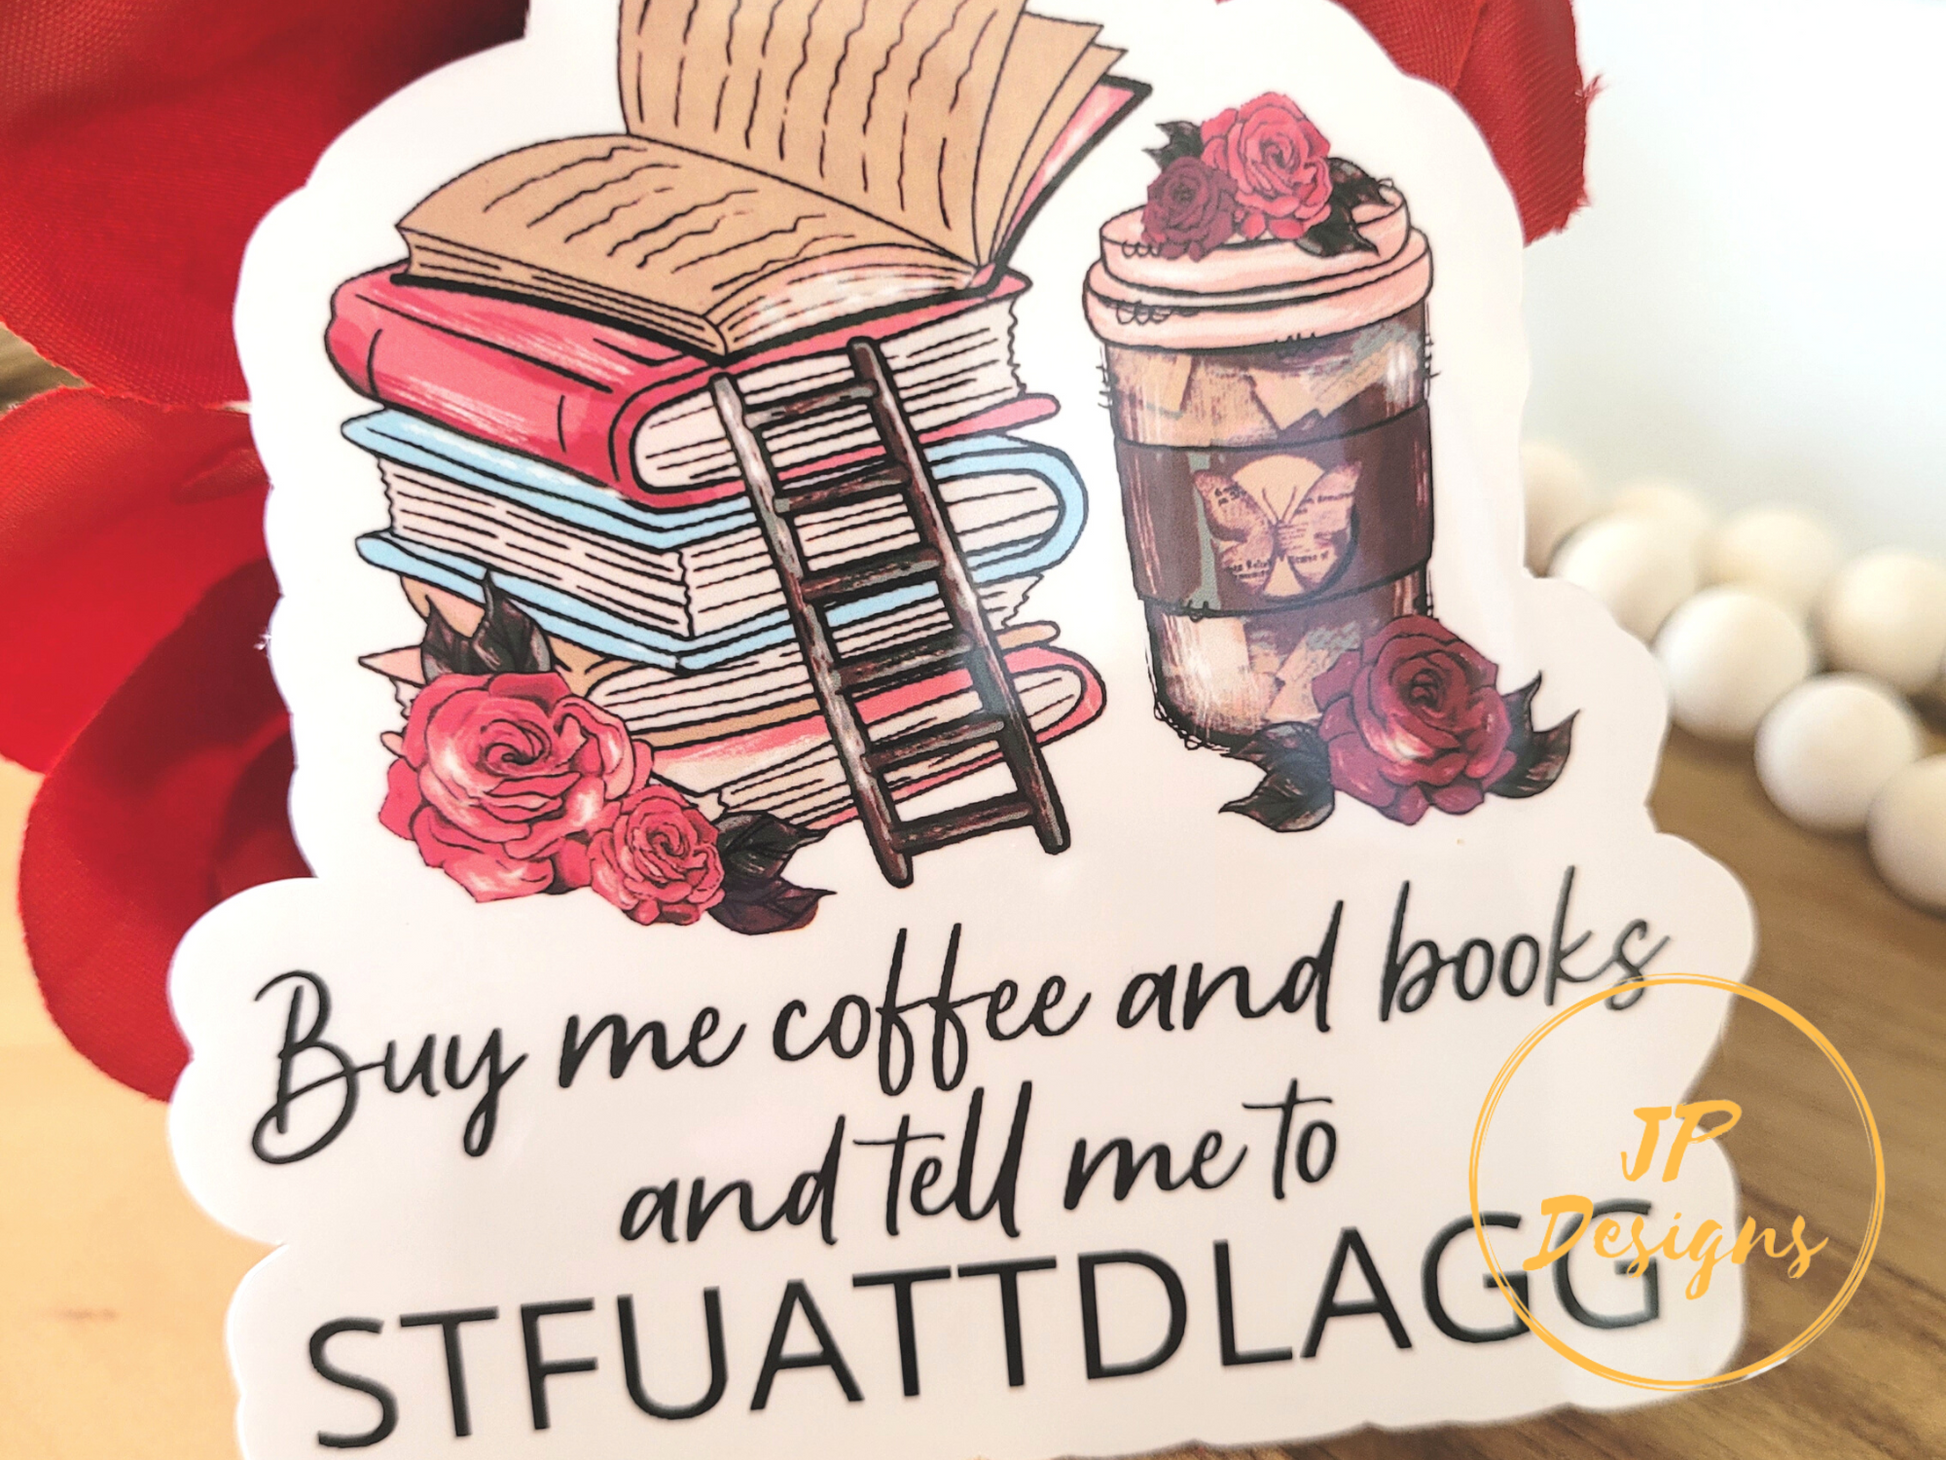 STFUATTDLAGG Sticker, Buy Me Coffee and Books and Shut Up and Take This D Like A Good Girl Sticker, Smut Sticker, Romance Book Lover Gift